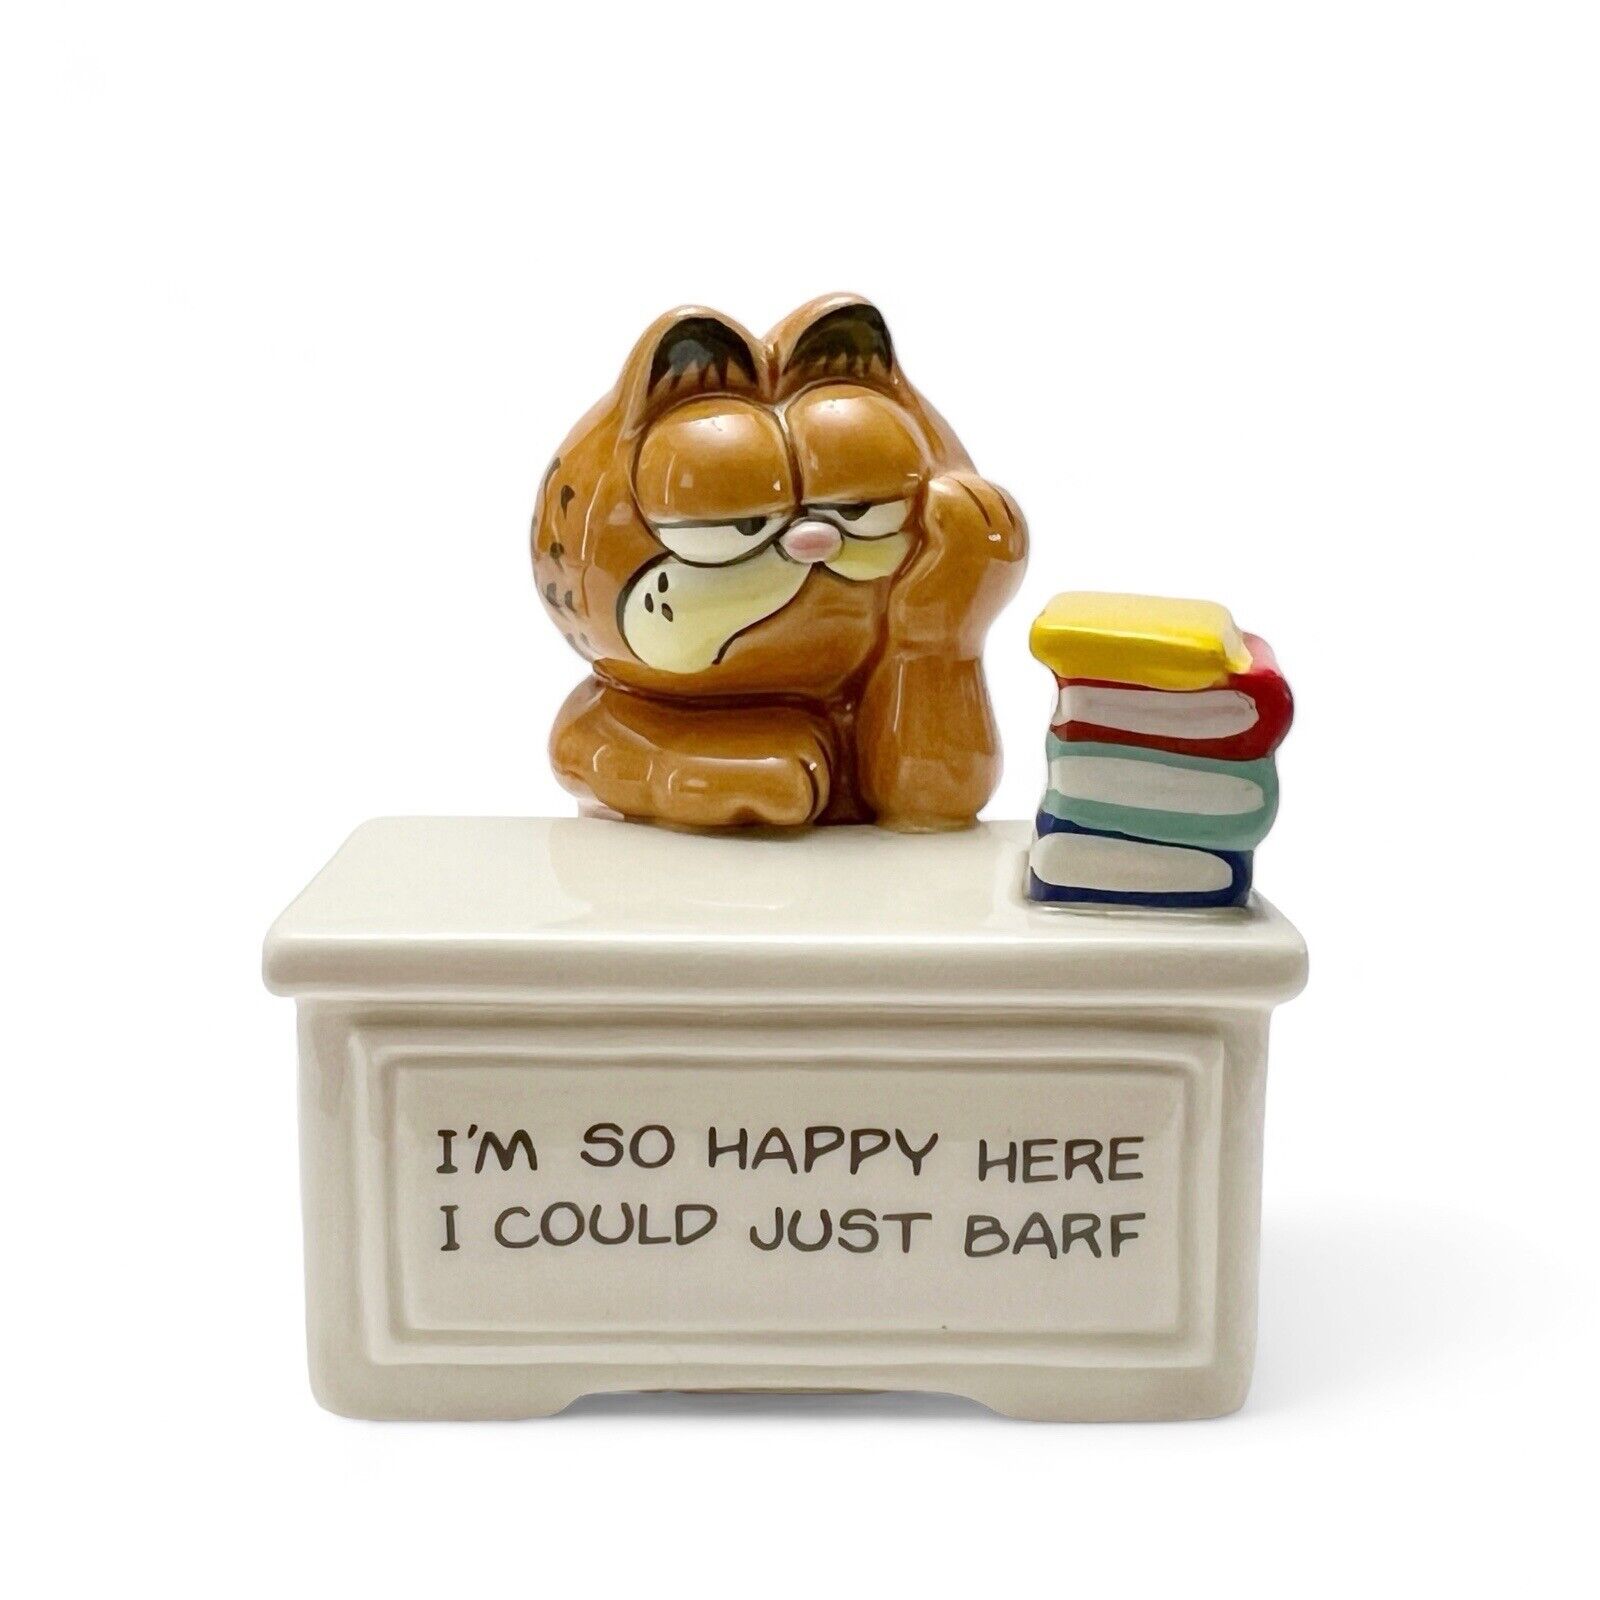 Vintage Enesco Garfield Figurine Ceramic “I’m So Happy Here I Could Just Barf”